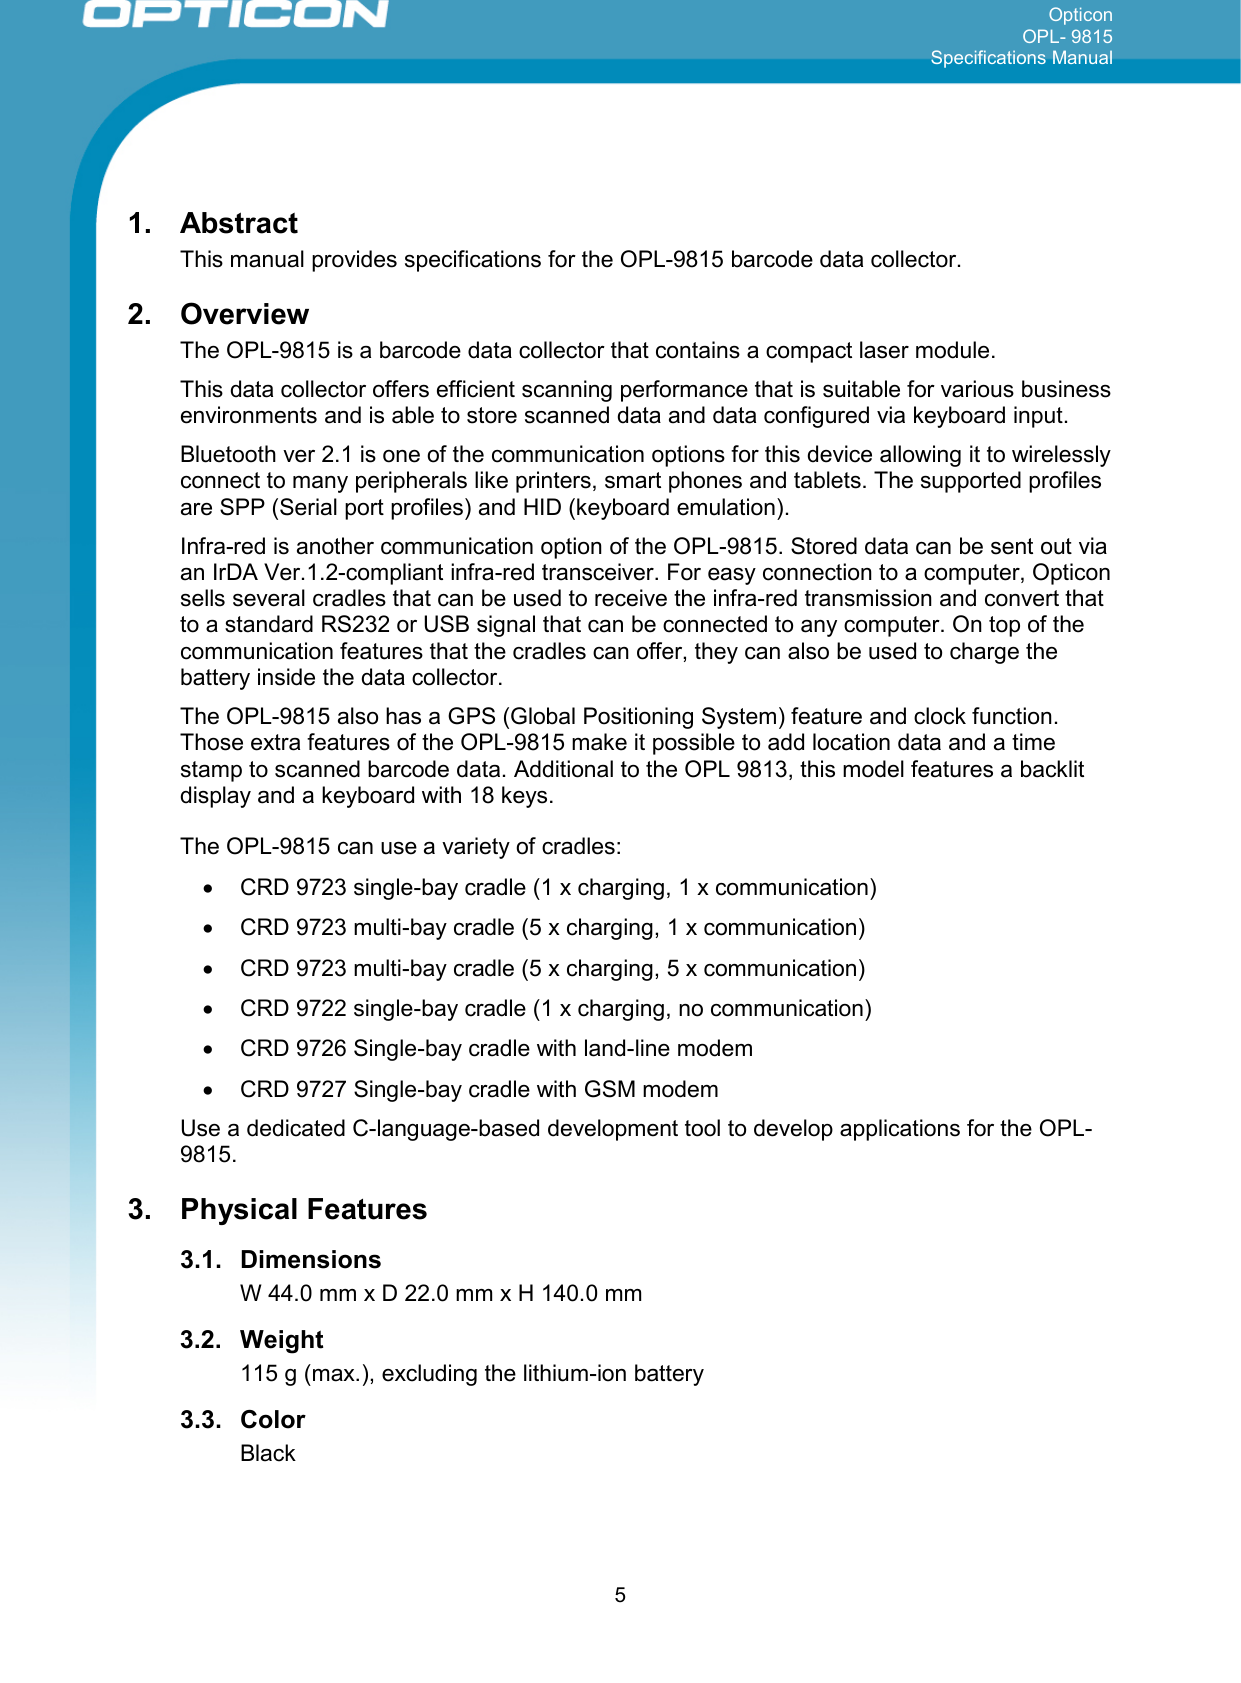 Opticon OPL- 9815 Specifications Manual     1. Abstract This manual provides specifications for the OPL-9815 barcode data collector. 2. Overview The OPL-9815 is a barcode data collector that contains a compact laser module. This data collector offers efficient scanning performance that is suitable for various business environments and is able to store scanned data and data configured via keyboard input.  Bluetooth ver 2.1 is one of the communication options for this device allowing it to wirelessly connect to many peripherals like printers, smart phones and tablets. The supported profiles are SPP (Serial port profiles) and HID (keyboard emulation). Infra-red is another communication option of the OPL-9815. Stored data can be sent out via an IrDA Ver.1.2-compliant infra-red transceiver. For easy connection to a computer, Opticon sells several cradles that can be used to receive the infra-red transmission and convert that to a standard RS232 or USB signal that can be connected to any computer. On top of the communication features that the cradles can offer, they can also be used to charge the battery inside the data collector. The OPL-9815 also has a GPS (Global Positioning System) feature and clock function. Those extra features of the OPL-9815 make it possible to add location data and a time stamp to scanned barcode data. Additional to the OPL 9813, this model features a backlit display and a keyboard with 18 keys. The OPL-9815 can use a variety of cradles: • CRD 9723 single-bay cradle (1 x charging, 1 x communication) • CRD 9723 multi-bay cradle (5 x charging, 1 x communication) • CRD 9723 multi-bay cradle (5 x charging, 5 x communication) • CRD 9722 single-bay cradle (1 x charging, no communication) • CRD 9726 Single-bay cradle with land-line modem • CRD 9727 Single-bay cradle with GSM modem Use a dedicated C-language-based development tool to develop applications for the OPL-9815. 3. Physical Features 3.1. Dimensions W 44.0 mm x D 22.0 mm x H 140.0 mm 3.2. Weight 115 g (max.), excluding the lithium-ion battery 3.3. Color Black  5 